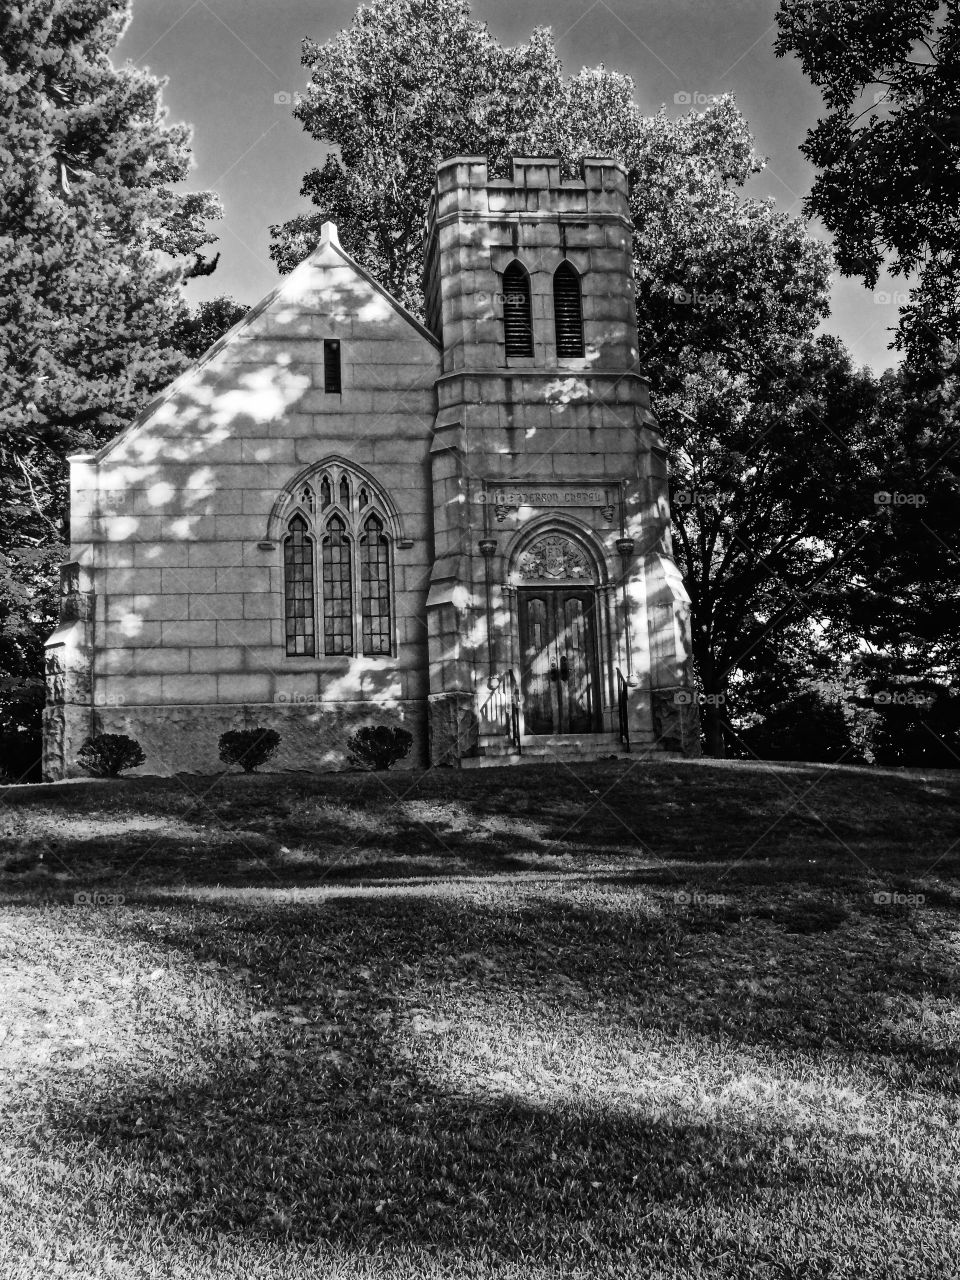 Castle-like chapel. Adorable Chapel with Castle-like features in a cemetery in Nashua, NH.